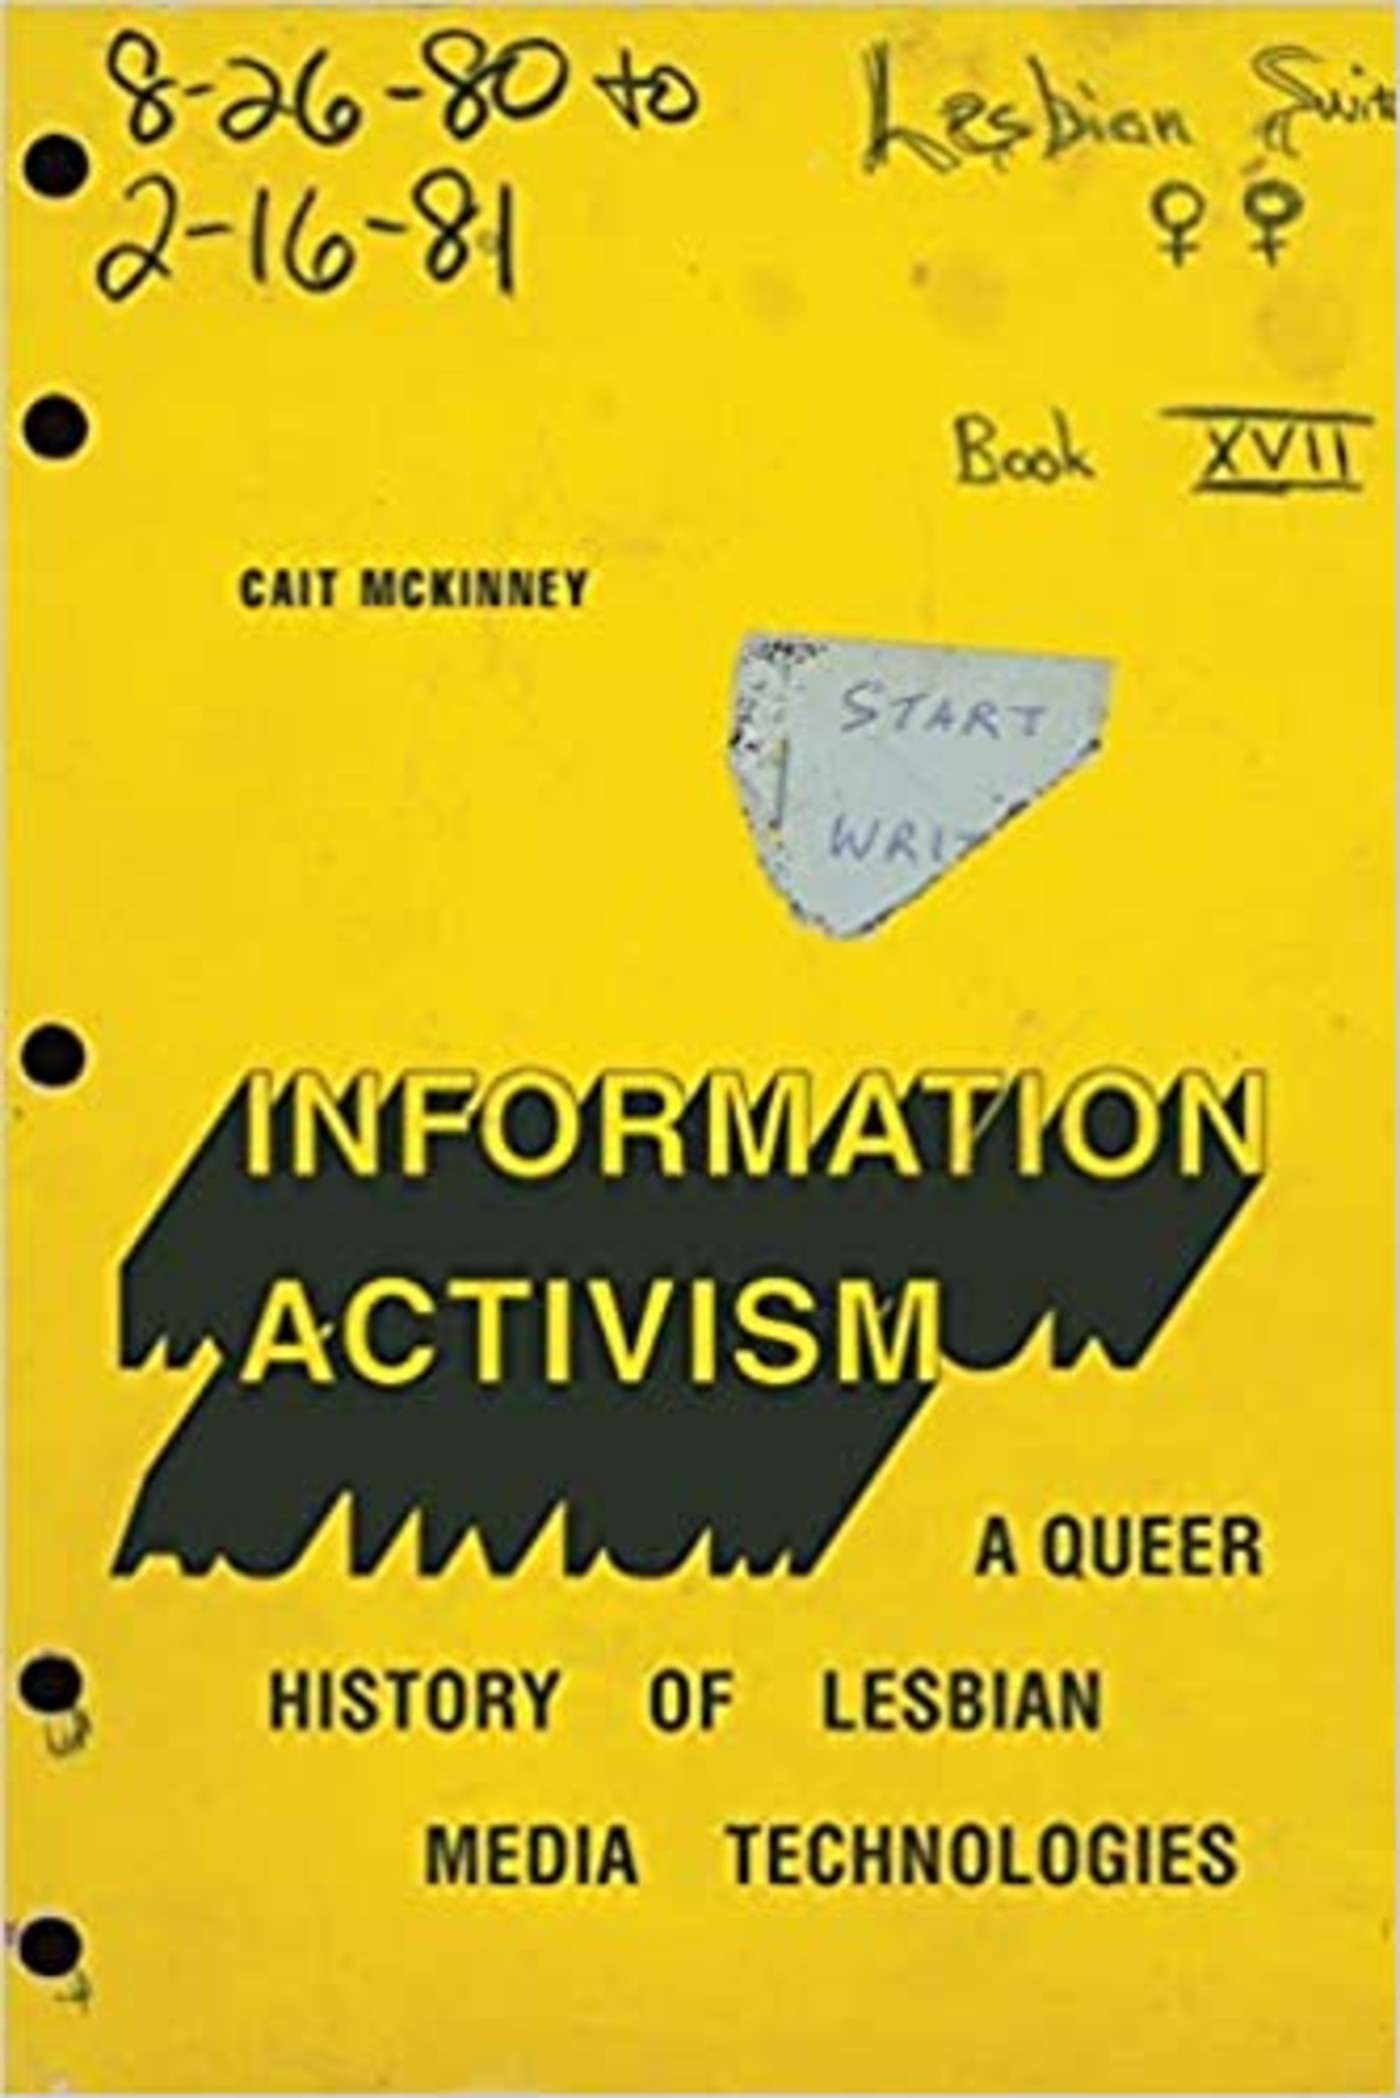 Two Queer Scholarly Books Distill Ideas About Dyke Networks